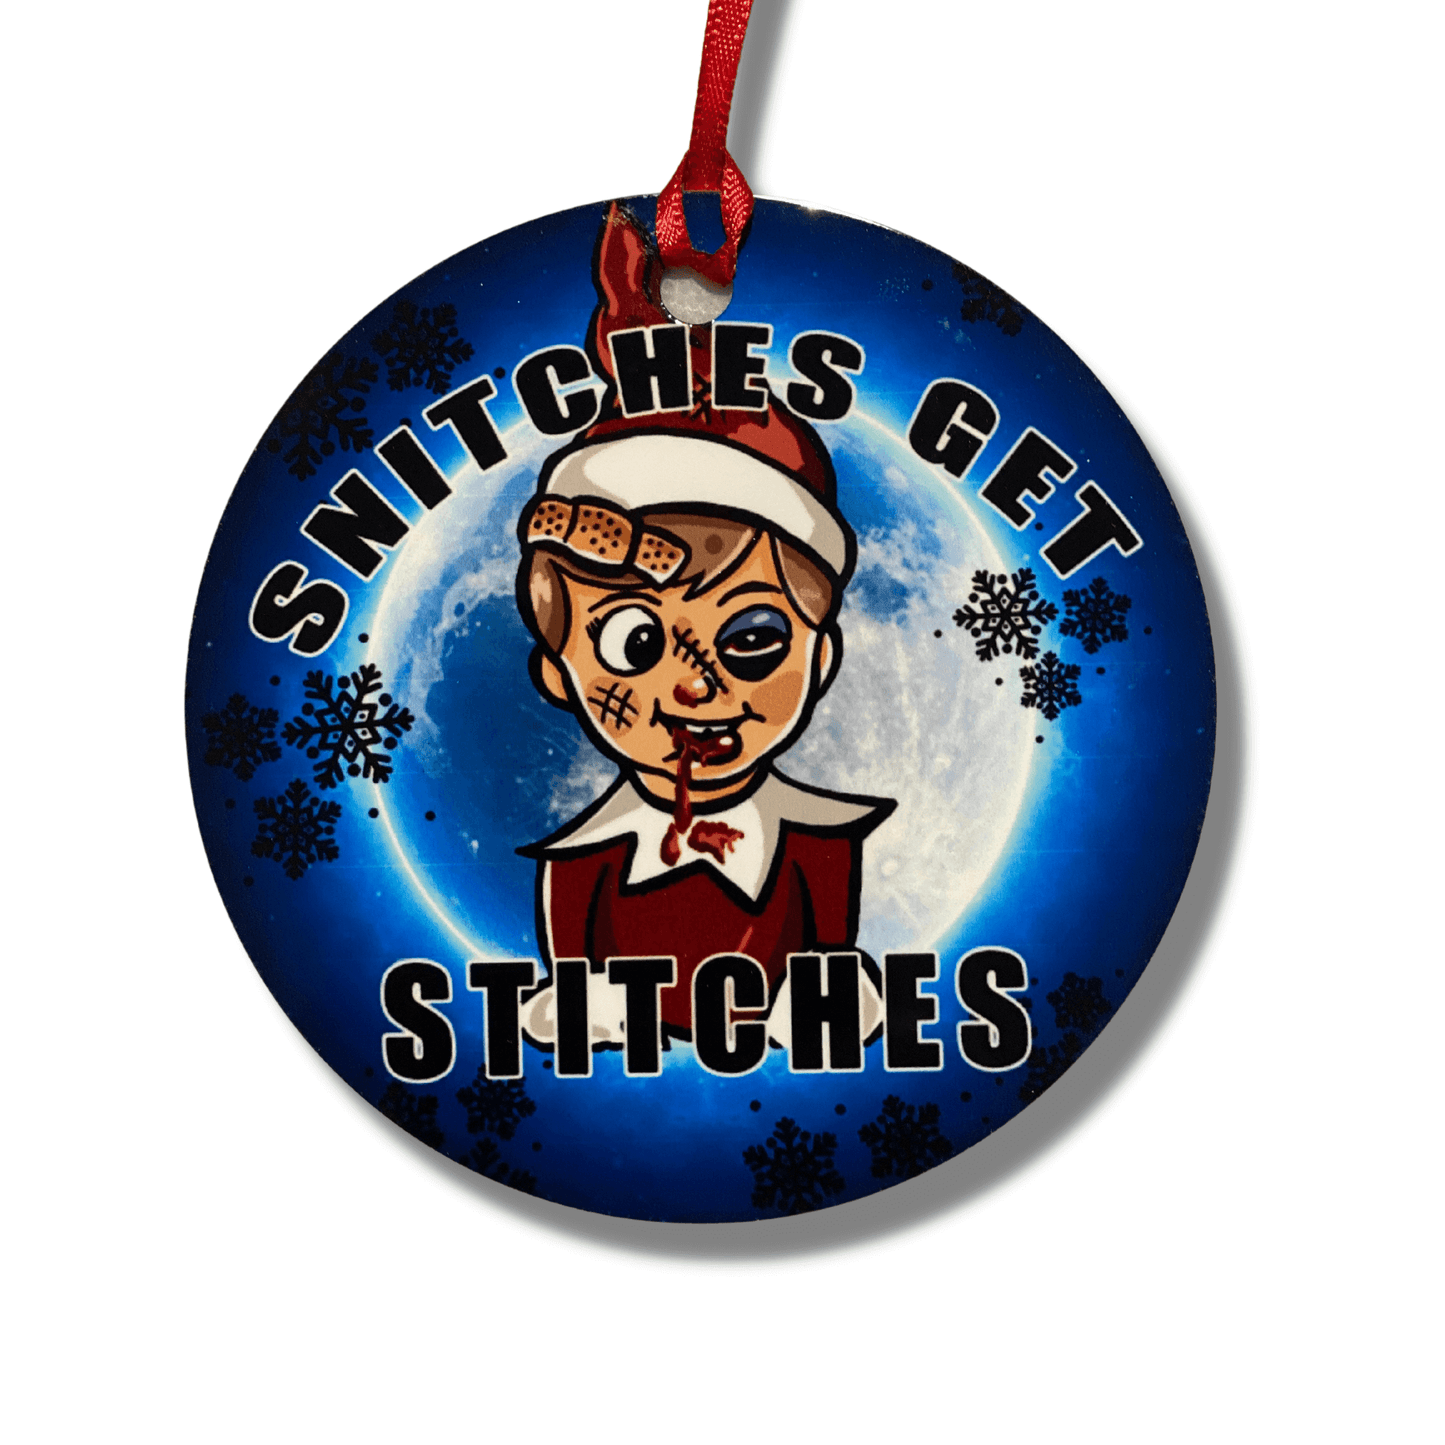 Snitches Get Stitches Funny Christmas Ornament 7